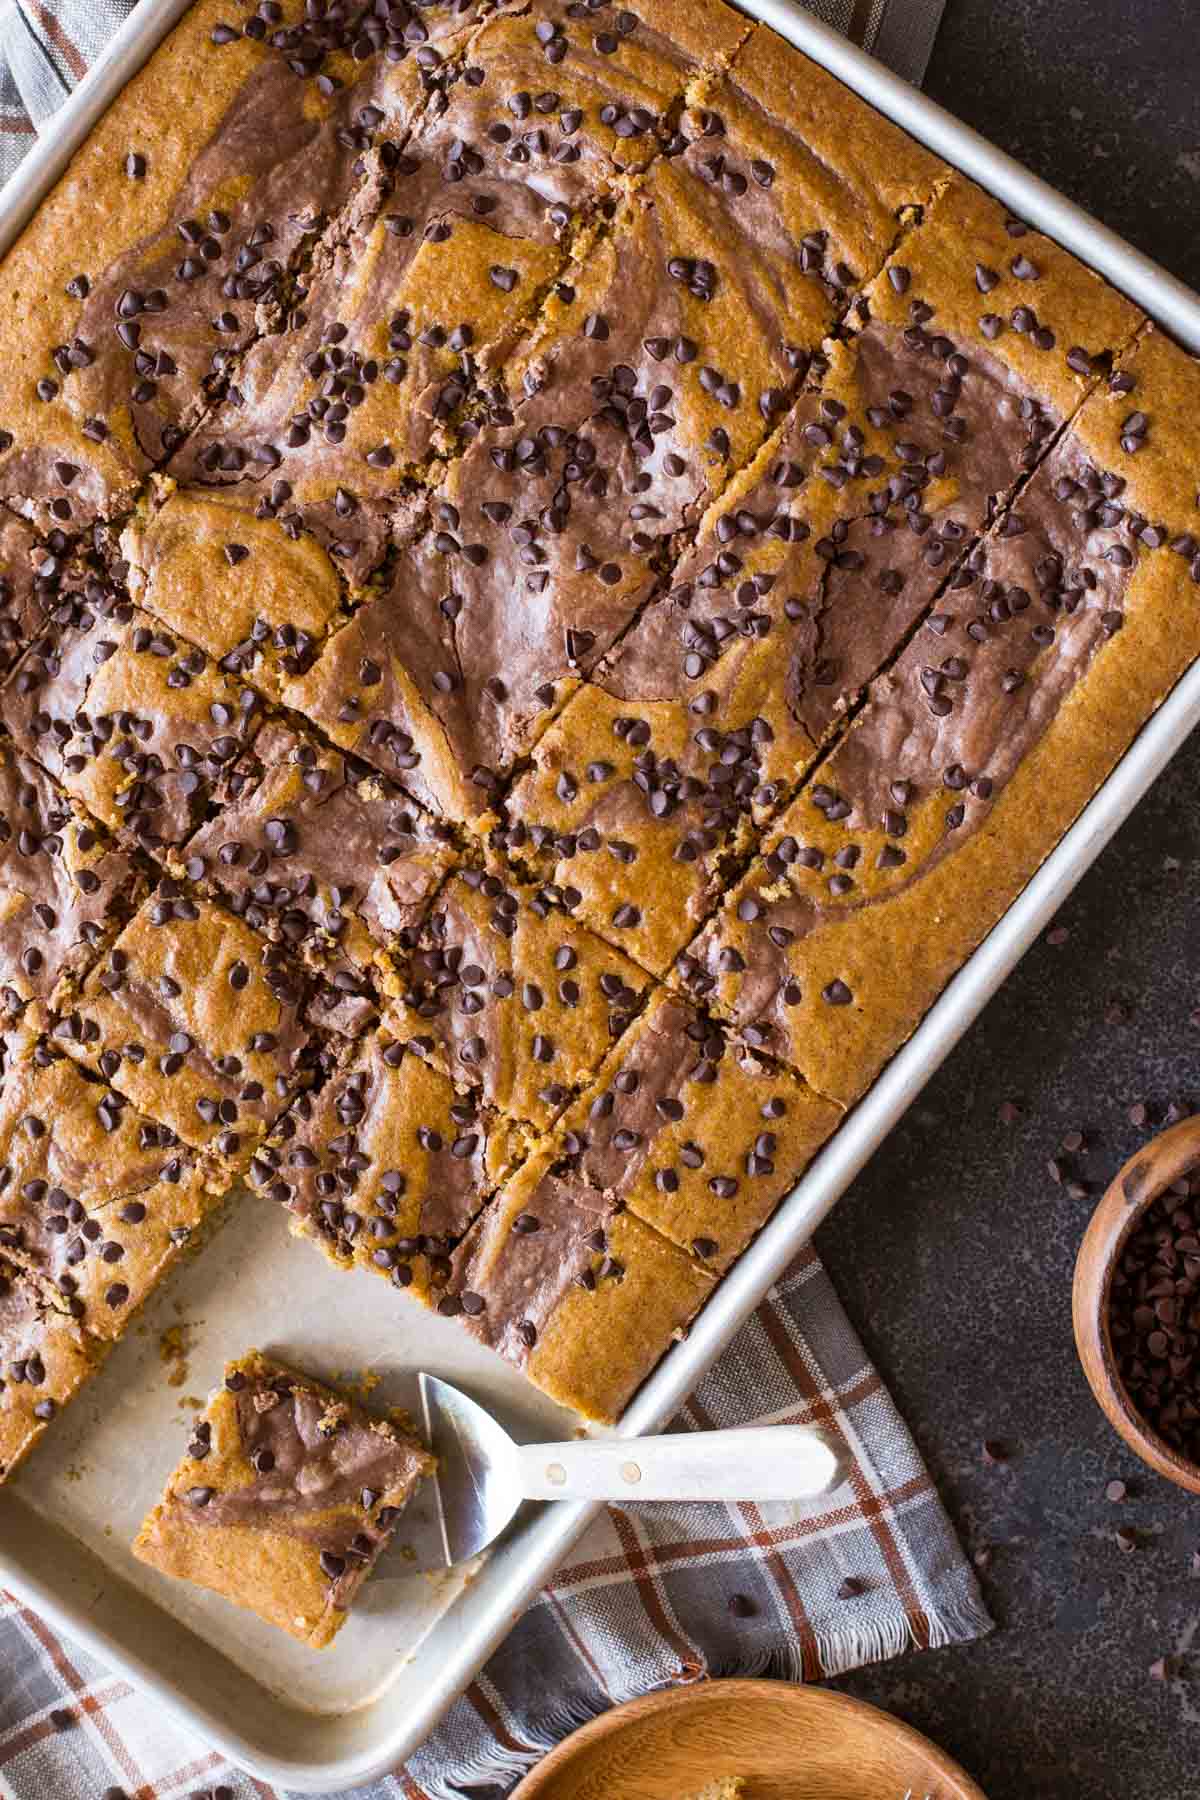 Chocolate-Swirled Pumpkin Bars cut in a baking pan with a serving spatula under one of the bars.